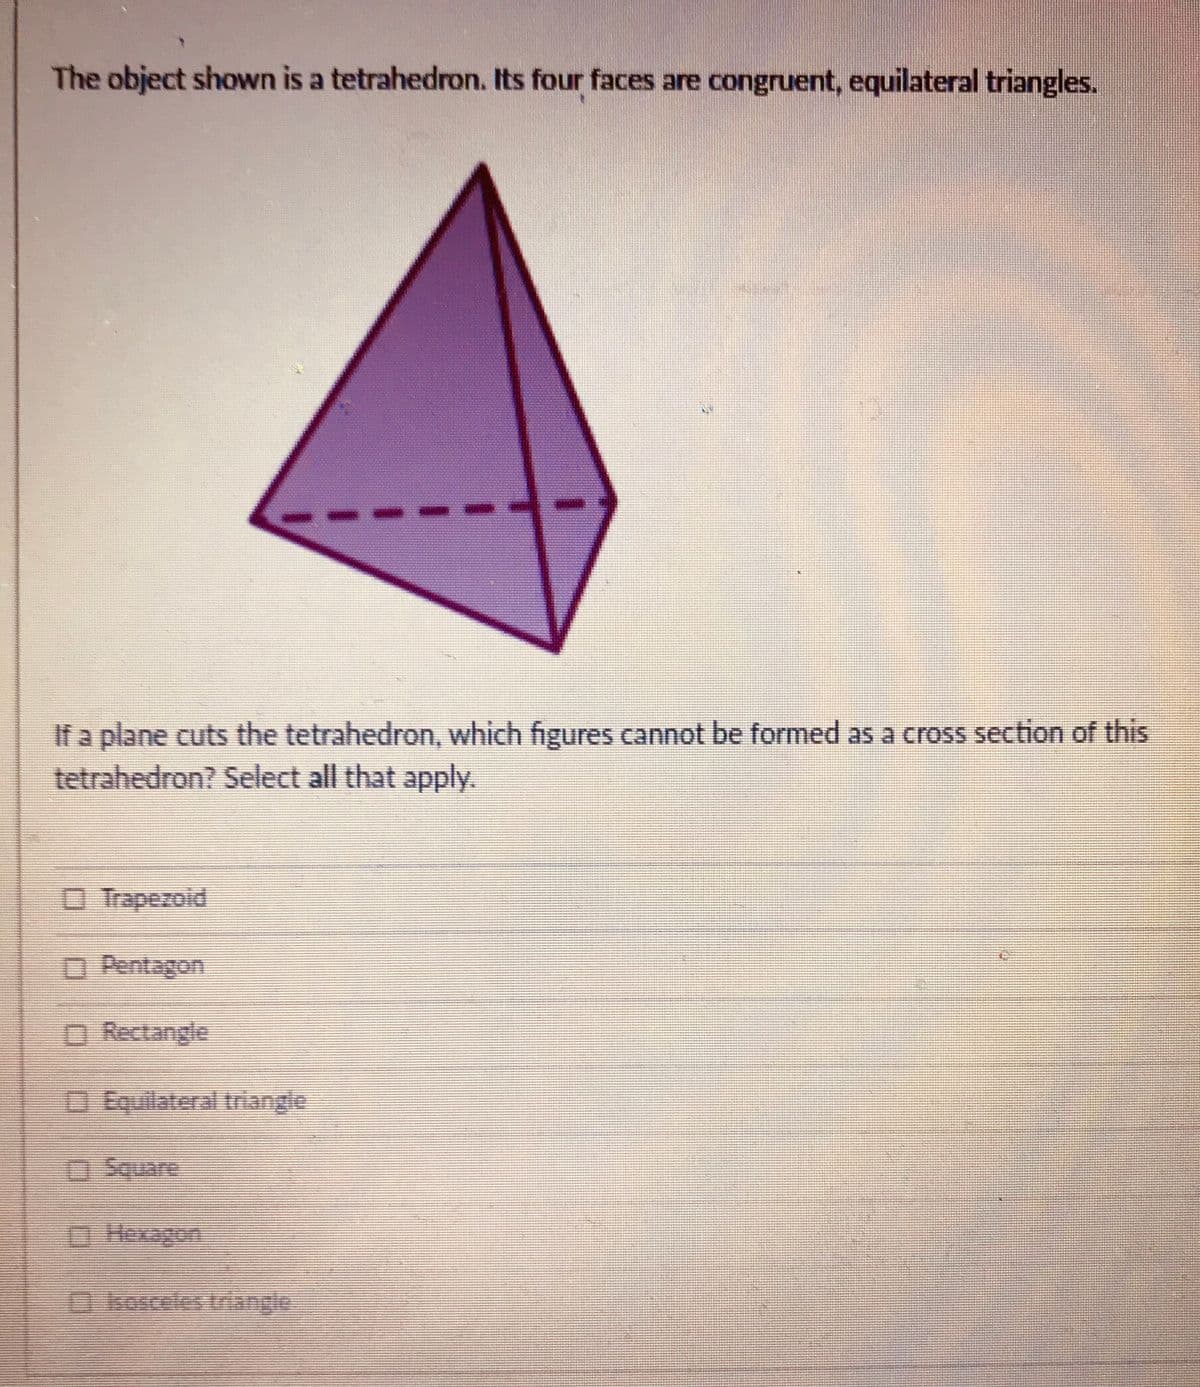 The object shown is a tetrahedron. Its four faces are congruent, equilateral triangles.
If a plane cuts the tetrahedron, which figures cannot be formed as a cross section of this
tetrahedron? Select all that apply.
O Trapezoid
D Pentagon
O Rectangle
DEquilateral triangle
Square
O Hexagon
0kosceles triangle
